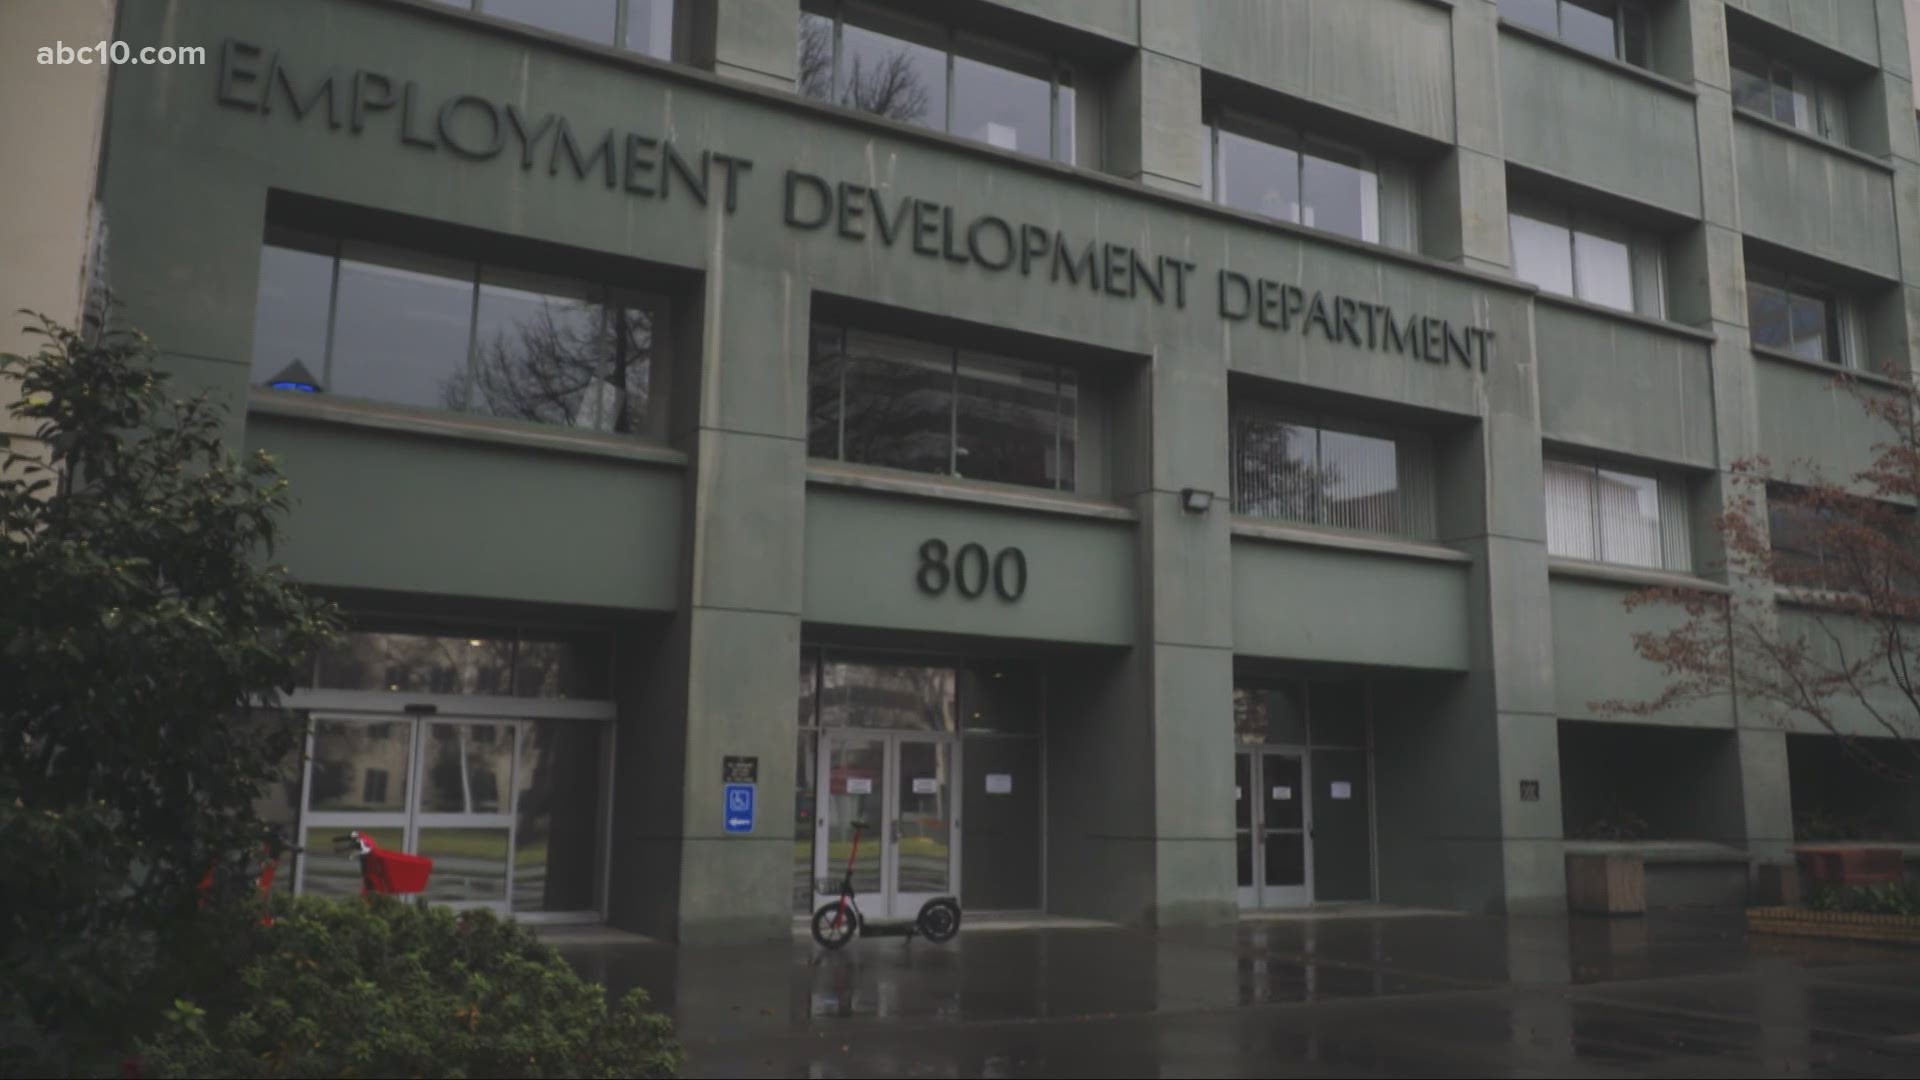 ABC10 spoke to the person responsible in helping states manage unemployment benefits  if EDD could face penalties for missing its deadles